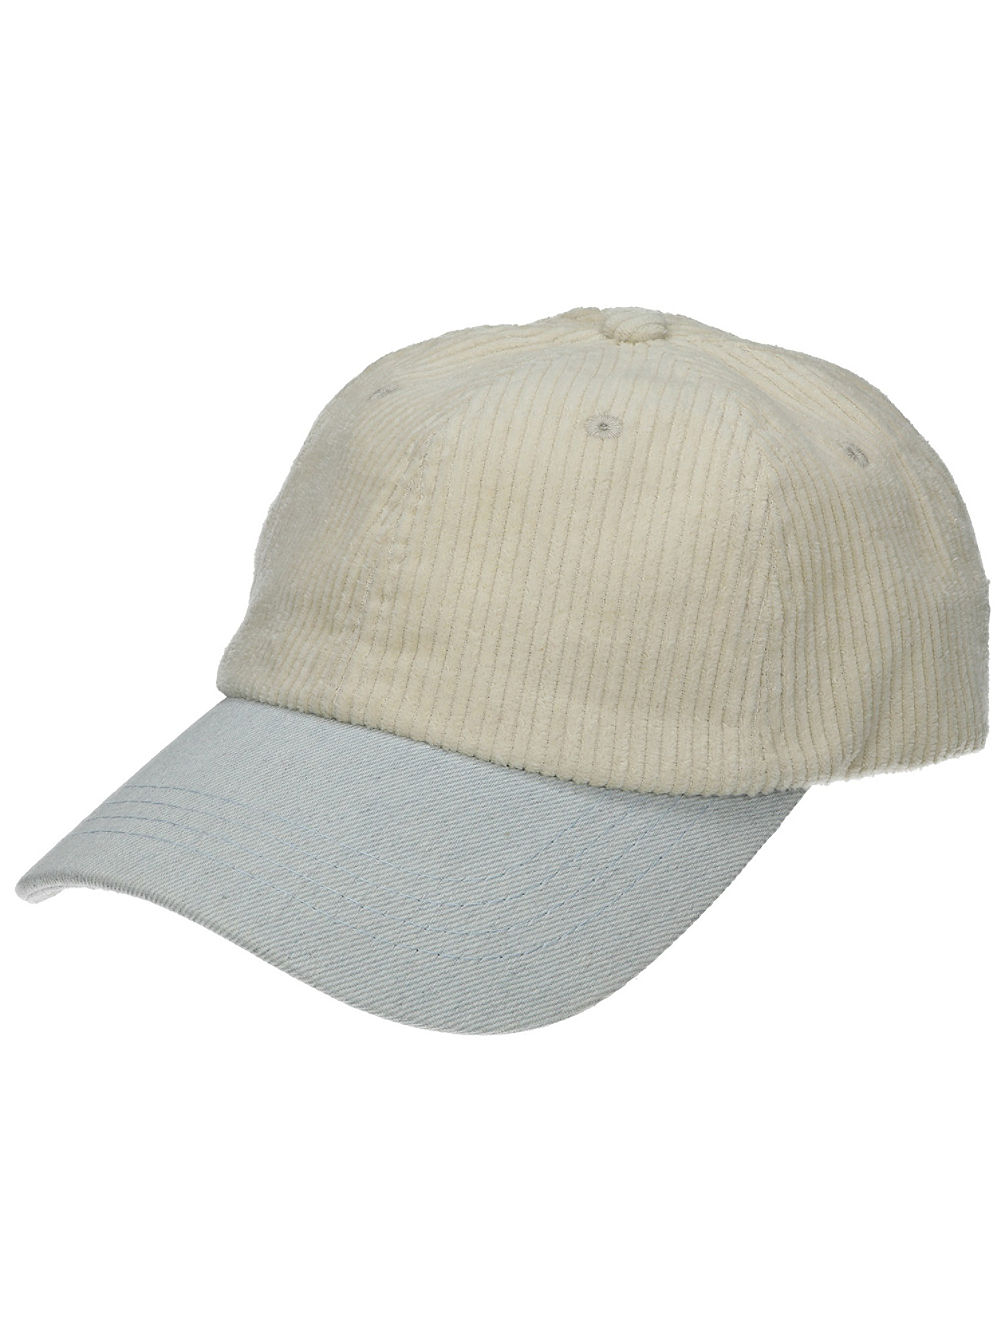 Patch Cord Dad Casquette